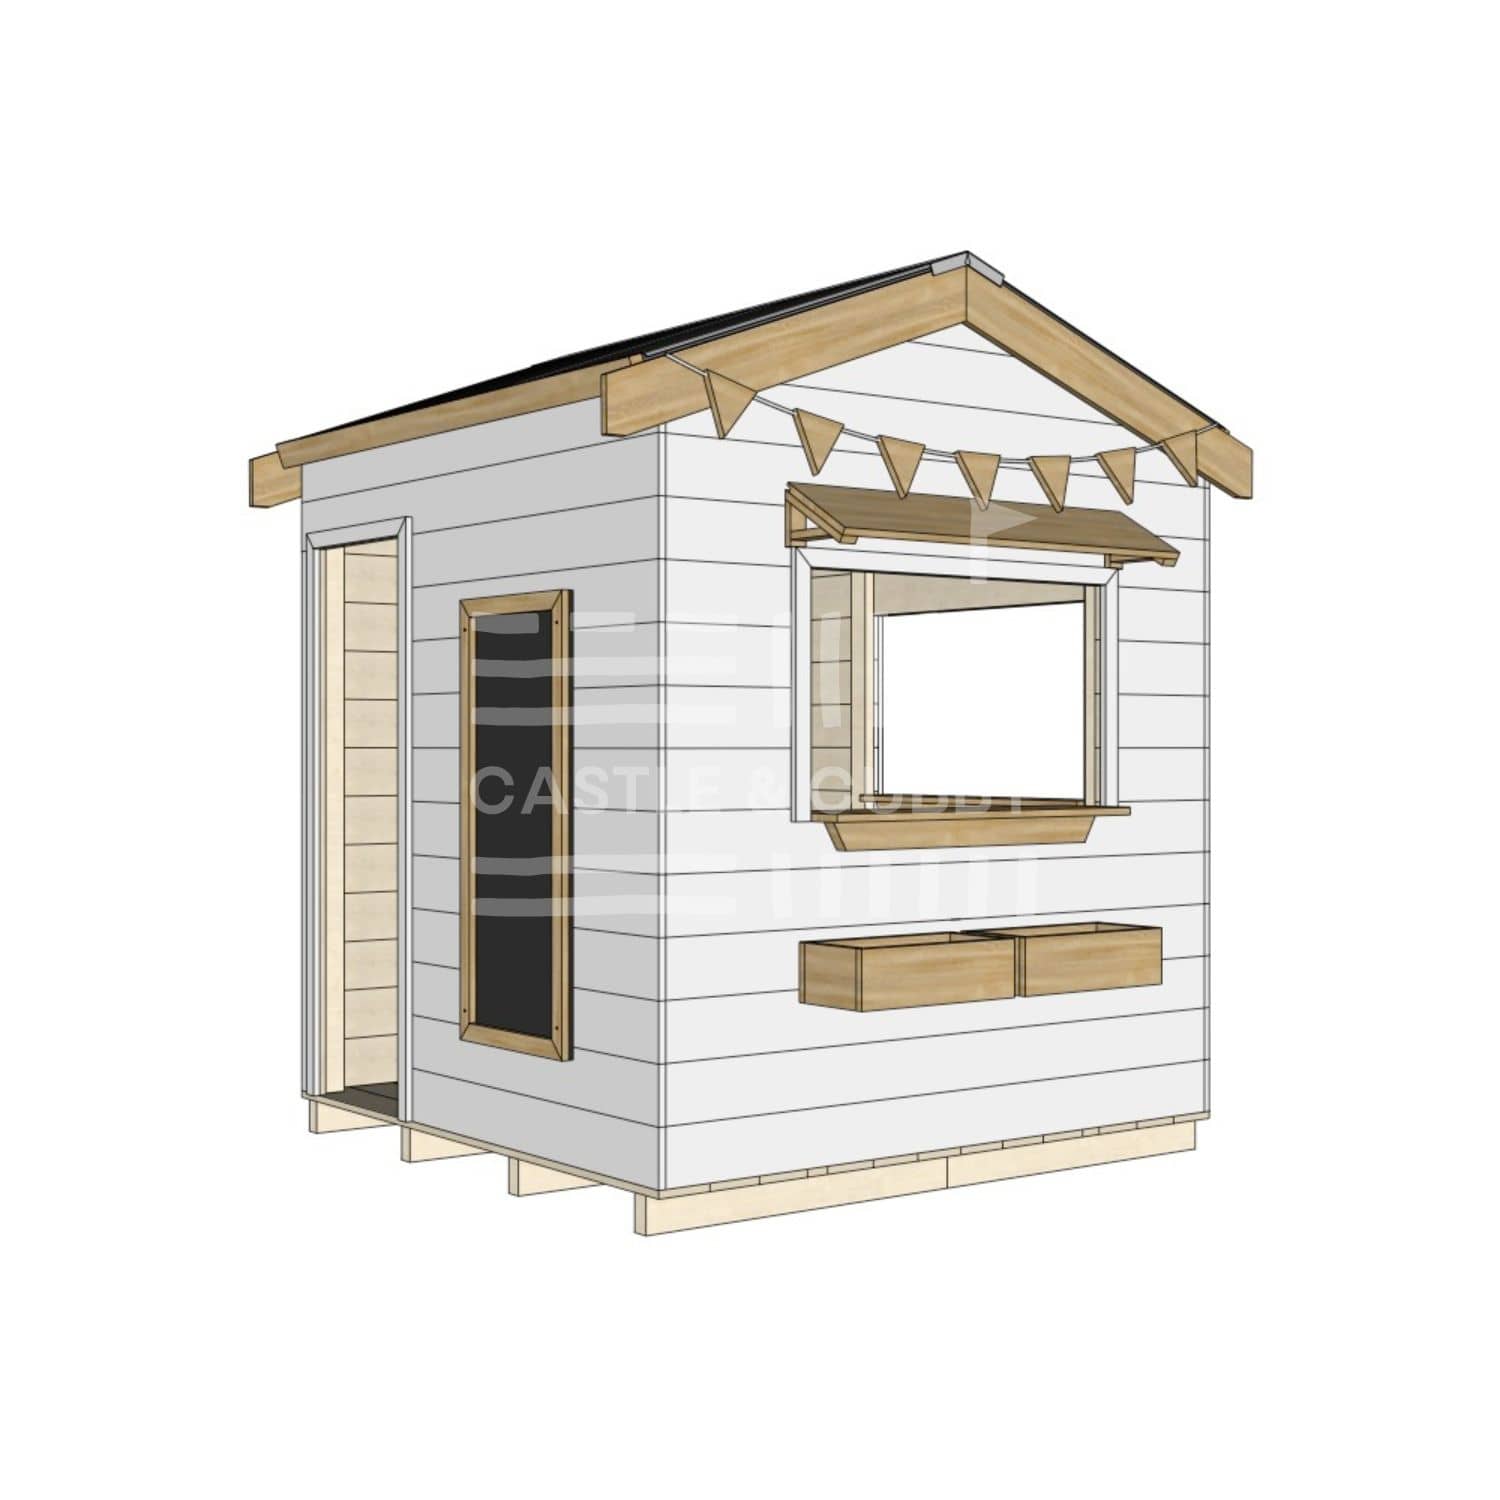 Pitched roof extra height painted wooden cubby house commercial education midi square accessories